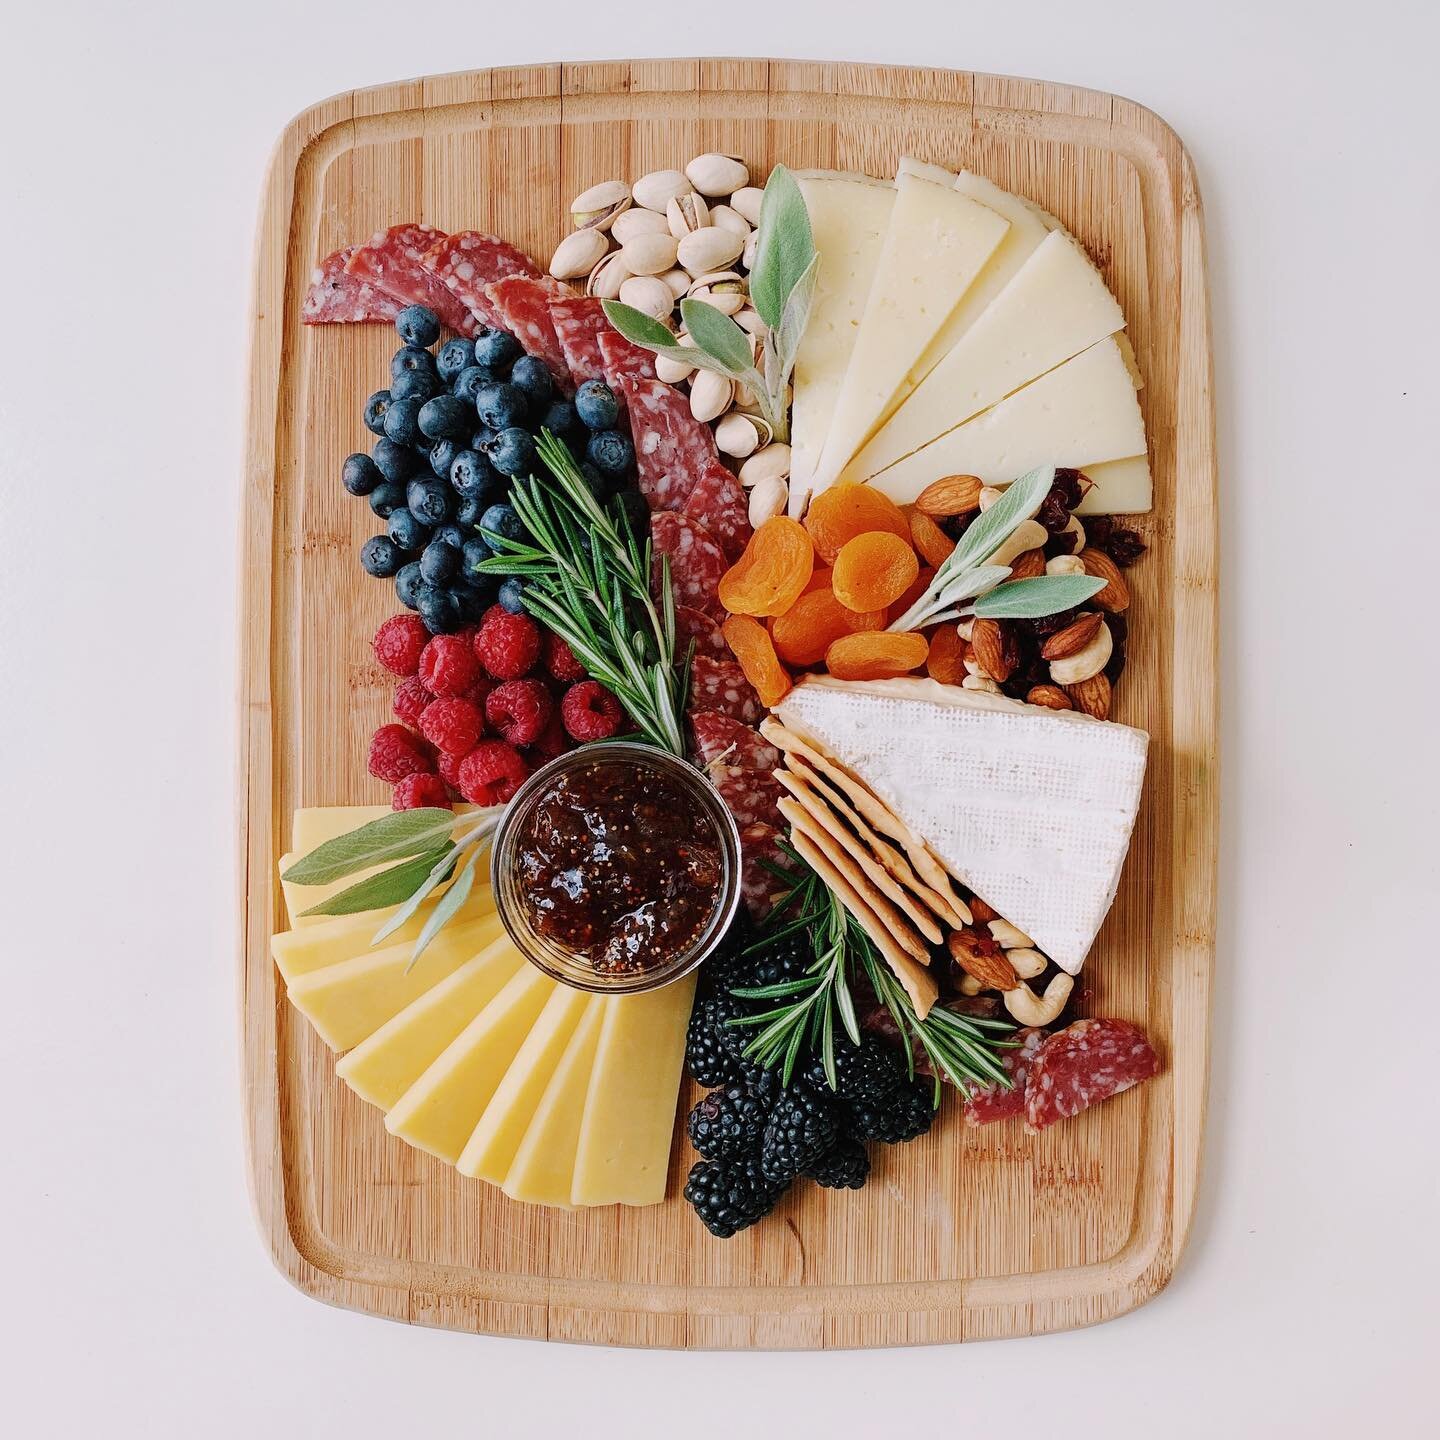 SWIPE TO BUILD ➡️ That &ldquo;Back To Basics&rdquo; Plate&nbsp;as seen on @thatcheeseplate and @goodmorningamerica today! This is the first plate in my book, an easy plate for beginners. 

KEY
Plate: 11 x 17 Cutting Board + 4oz Ramekin 

1 - CHEESE: 